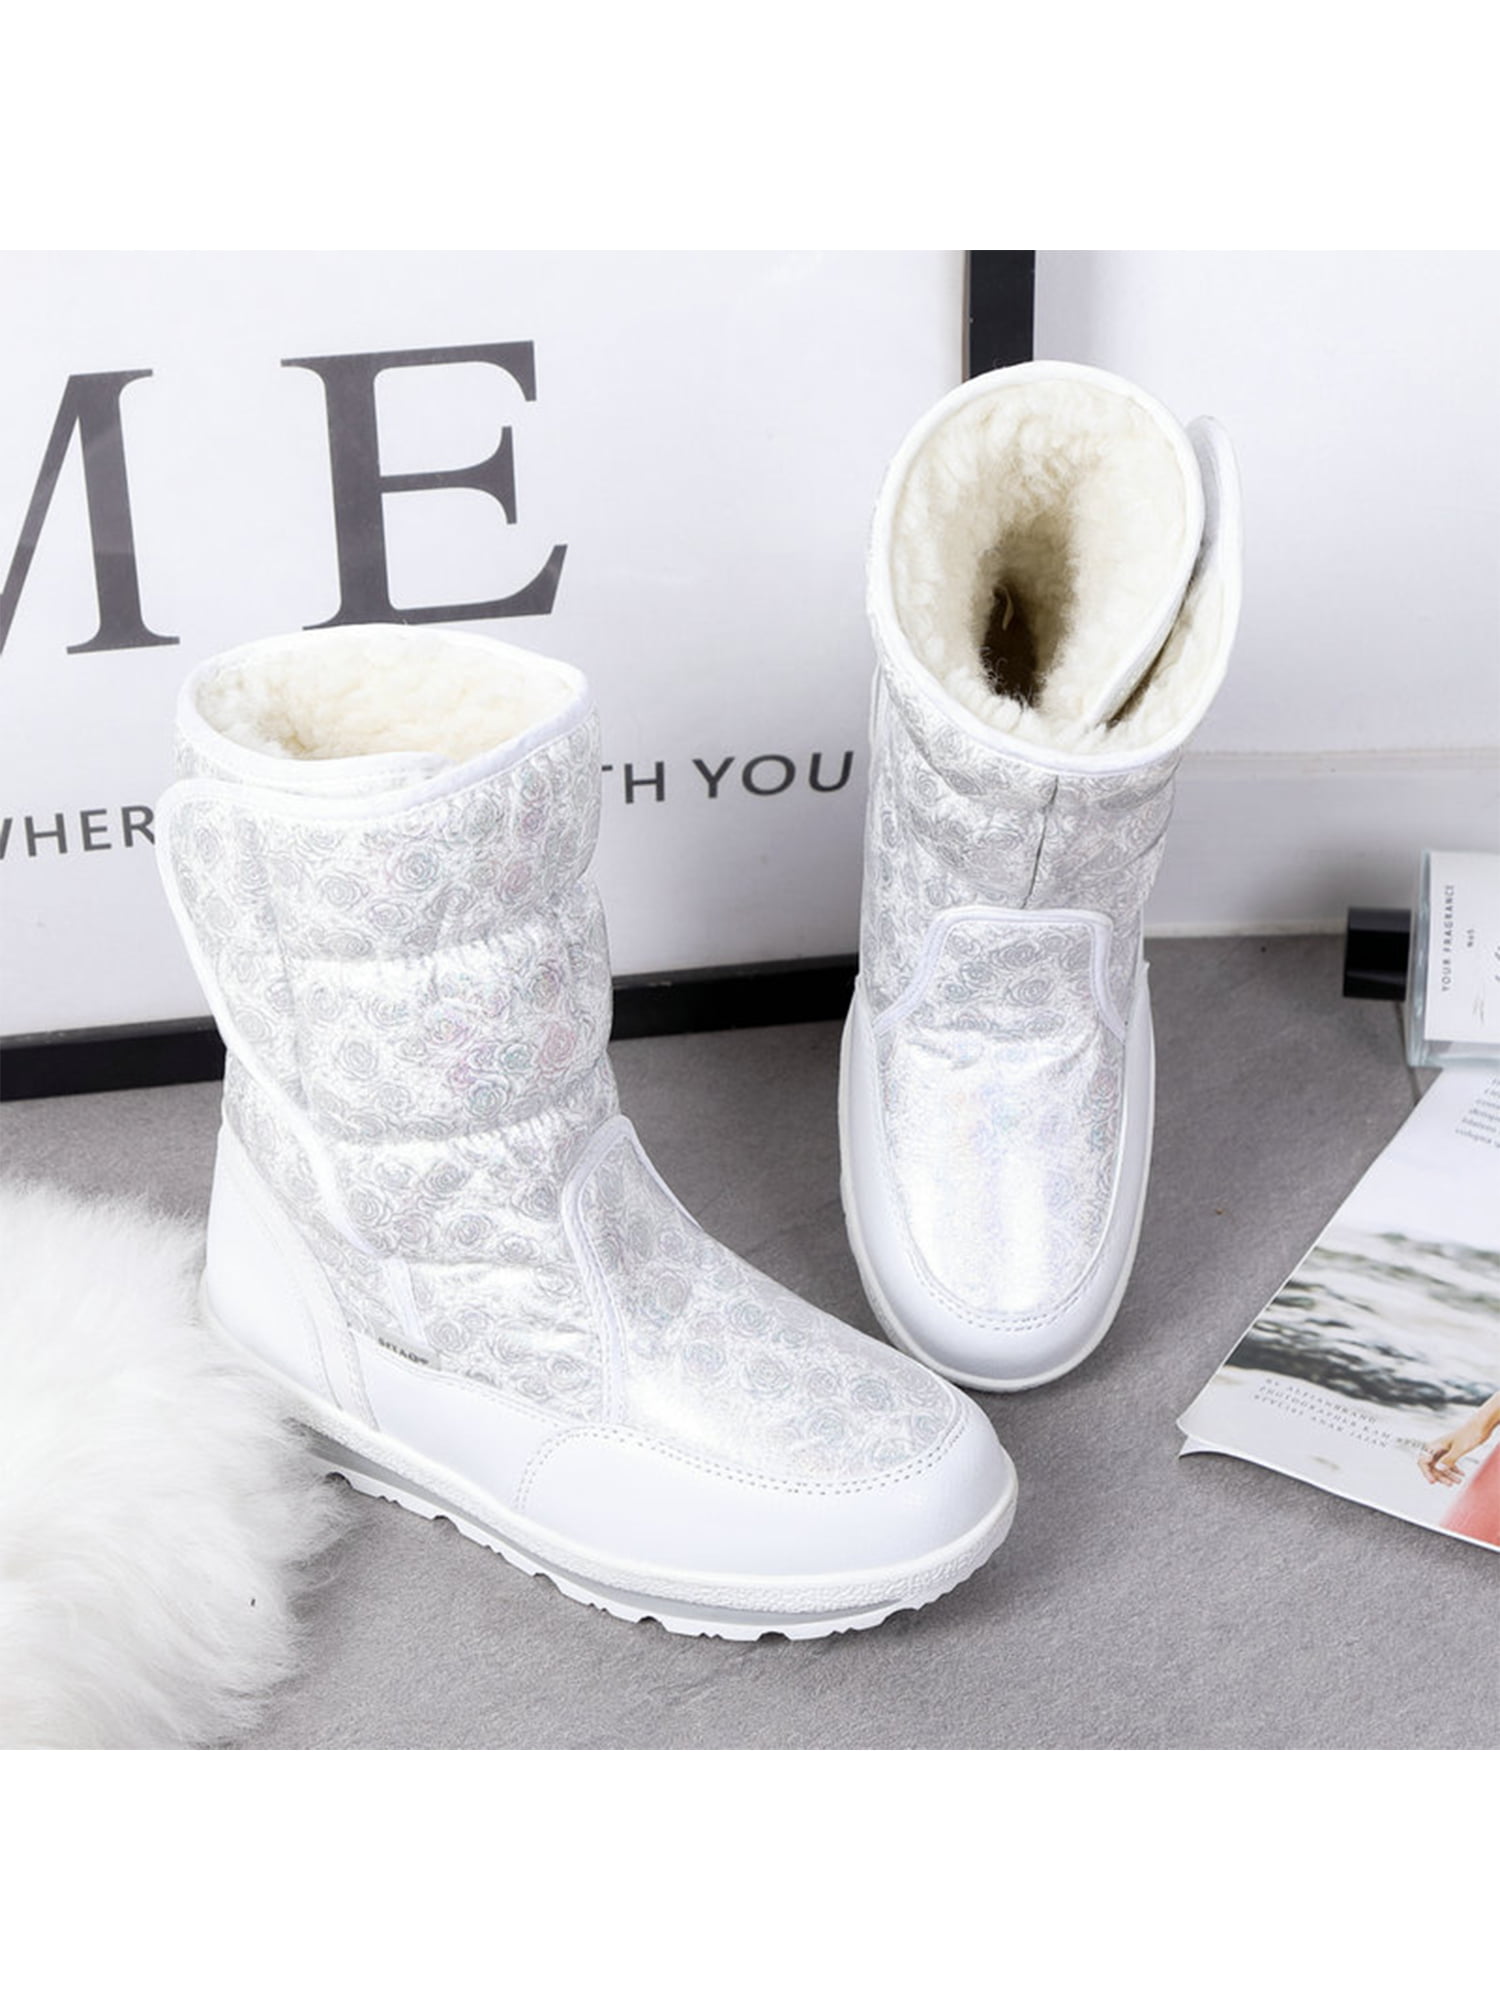 Details about   Fashion Women Plus size Waterproof Snow Winter Warm Fur Mid Calf Outdoor boots